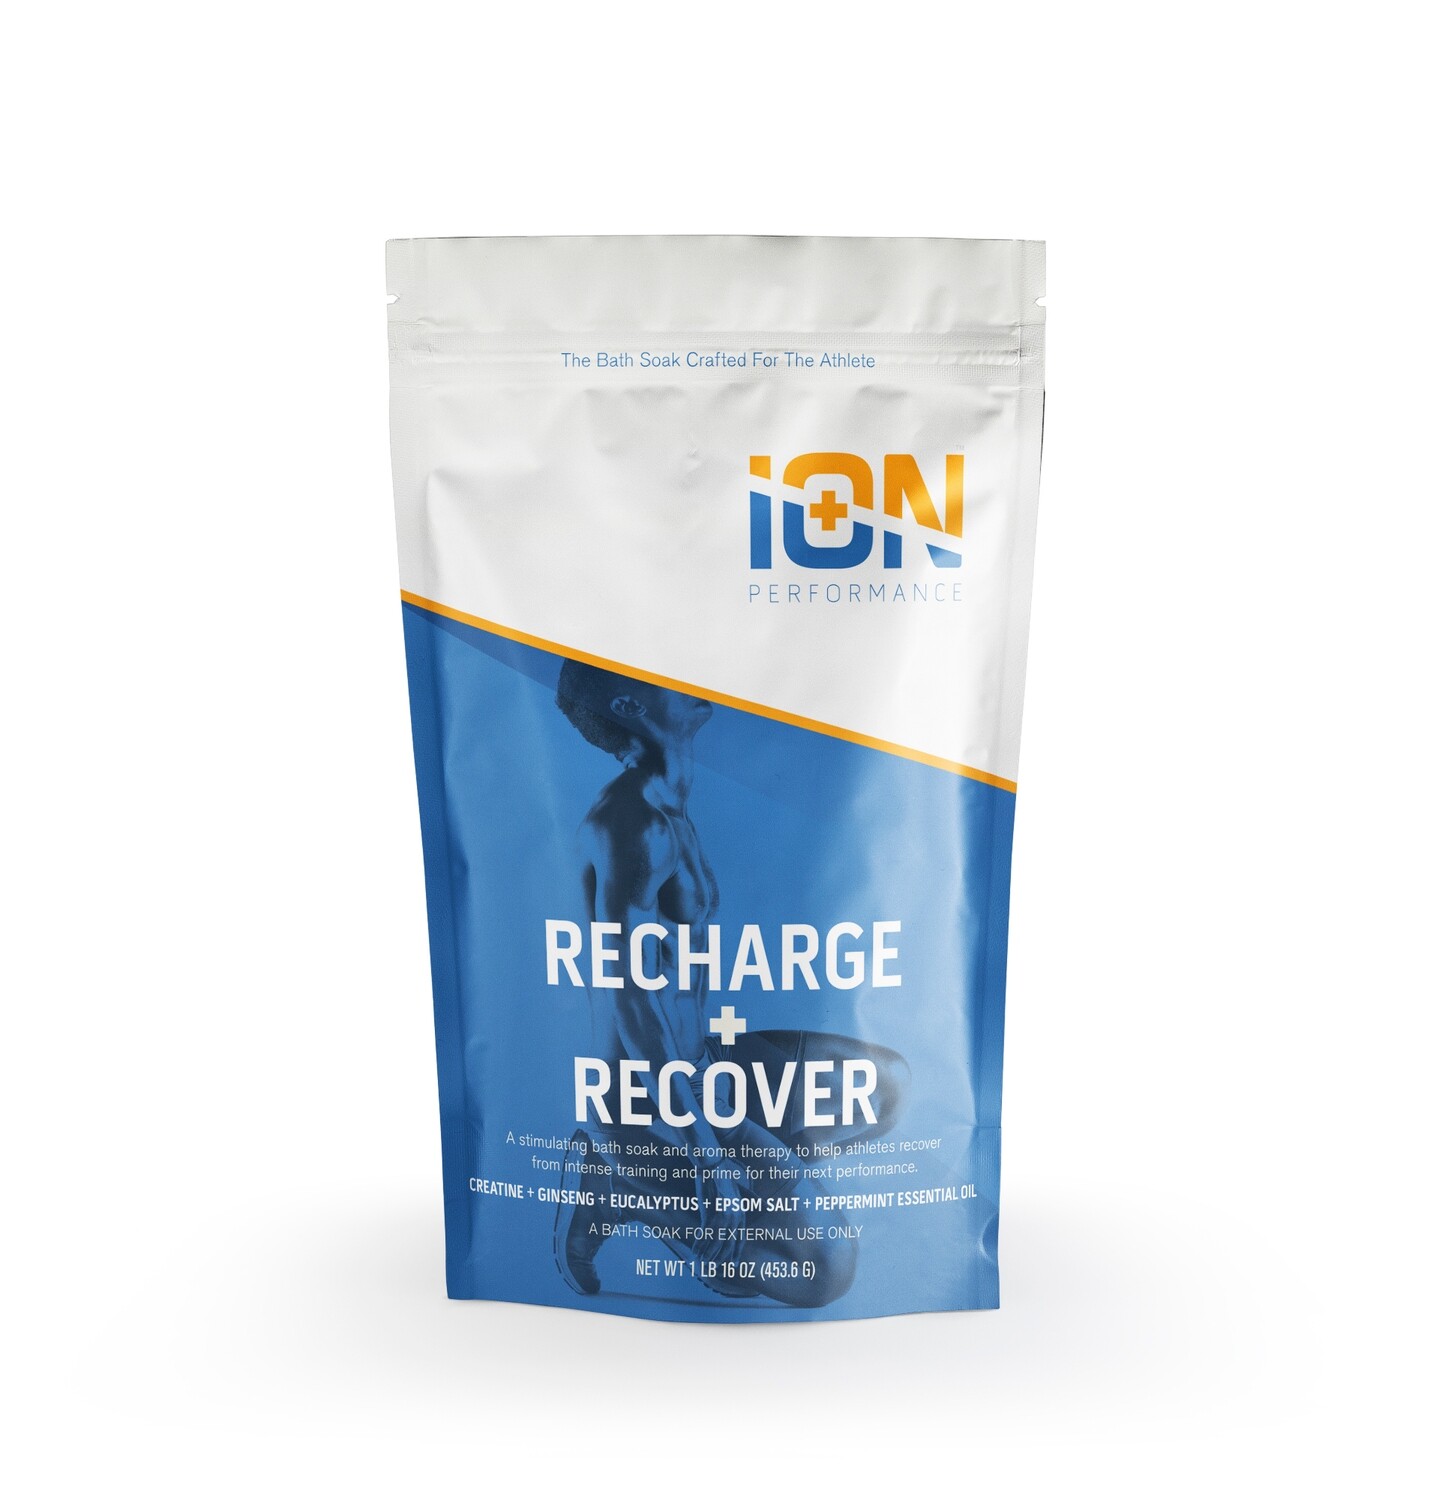 Recharge + Recover Creatine Mg Soak for Preparation and Recovery